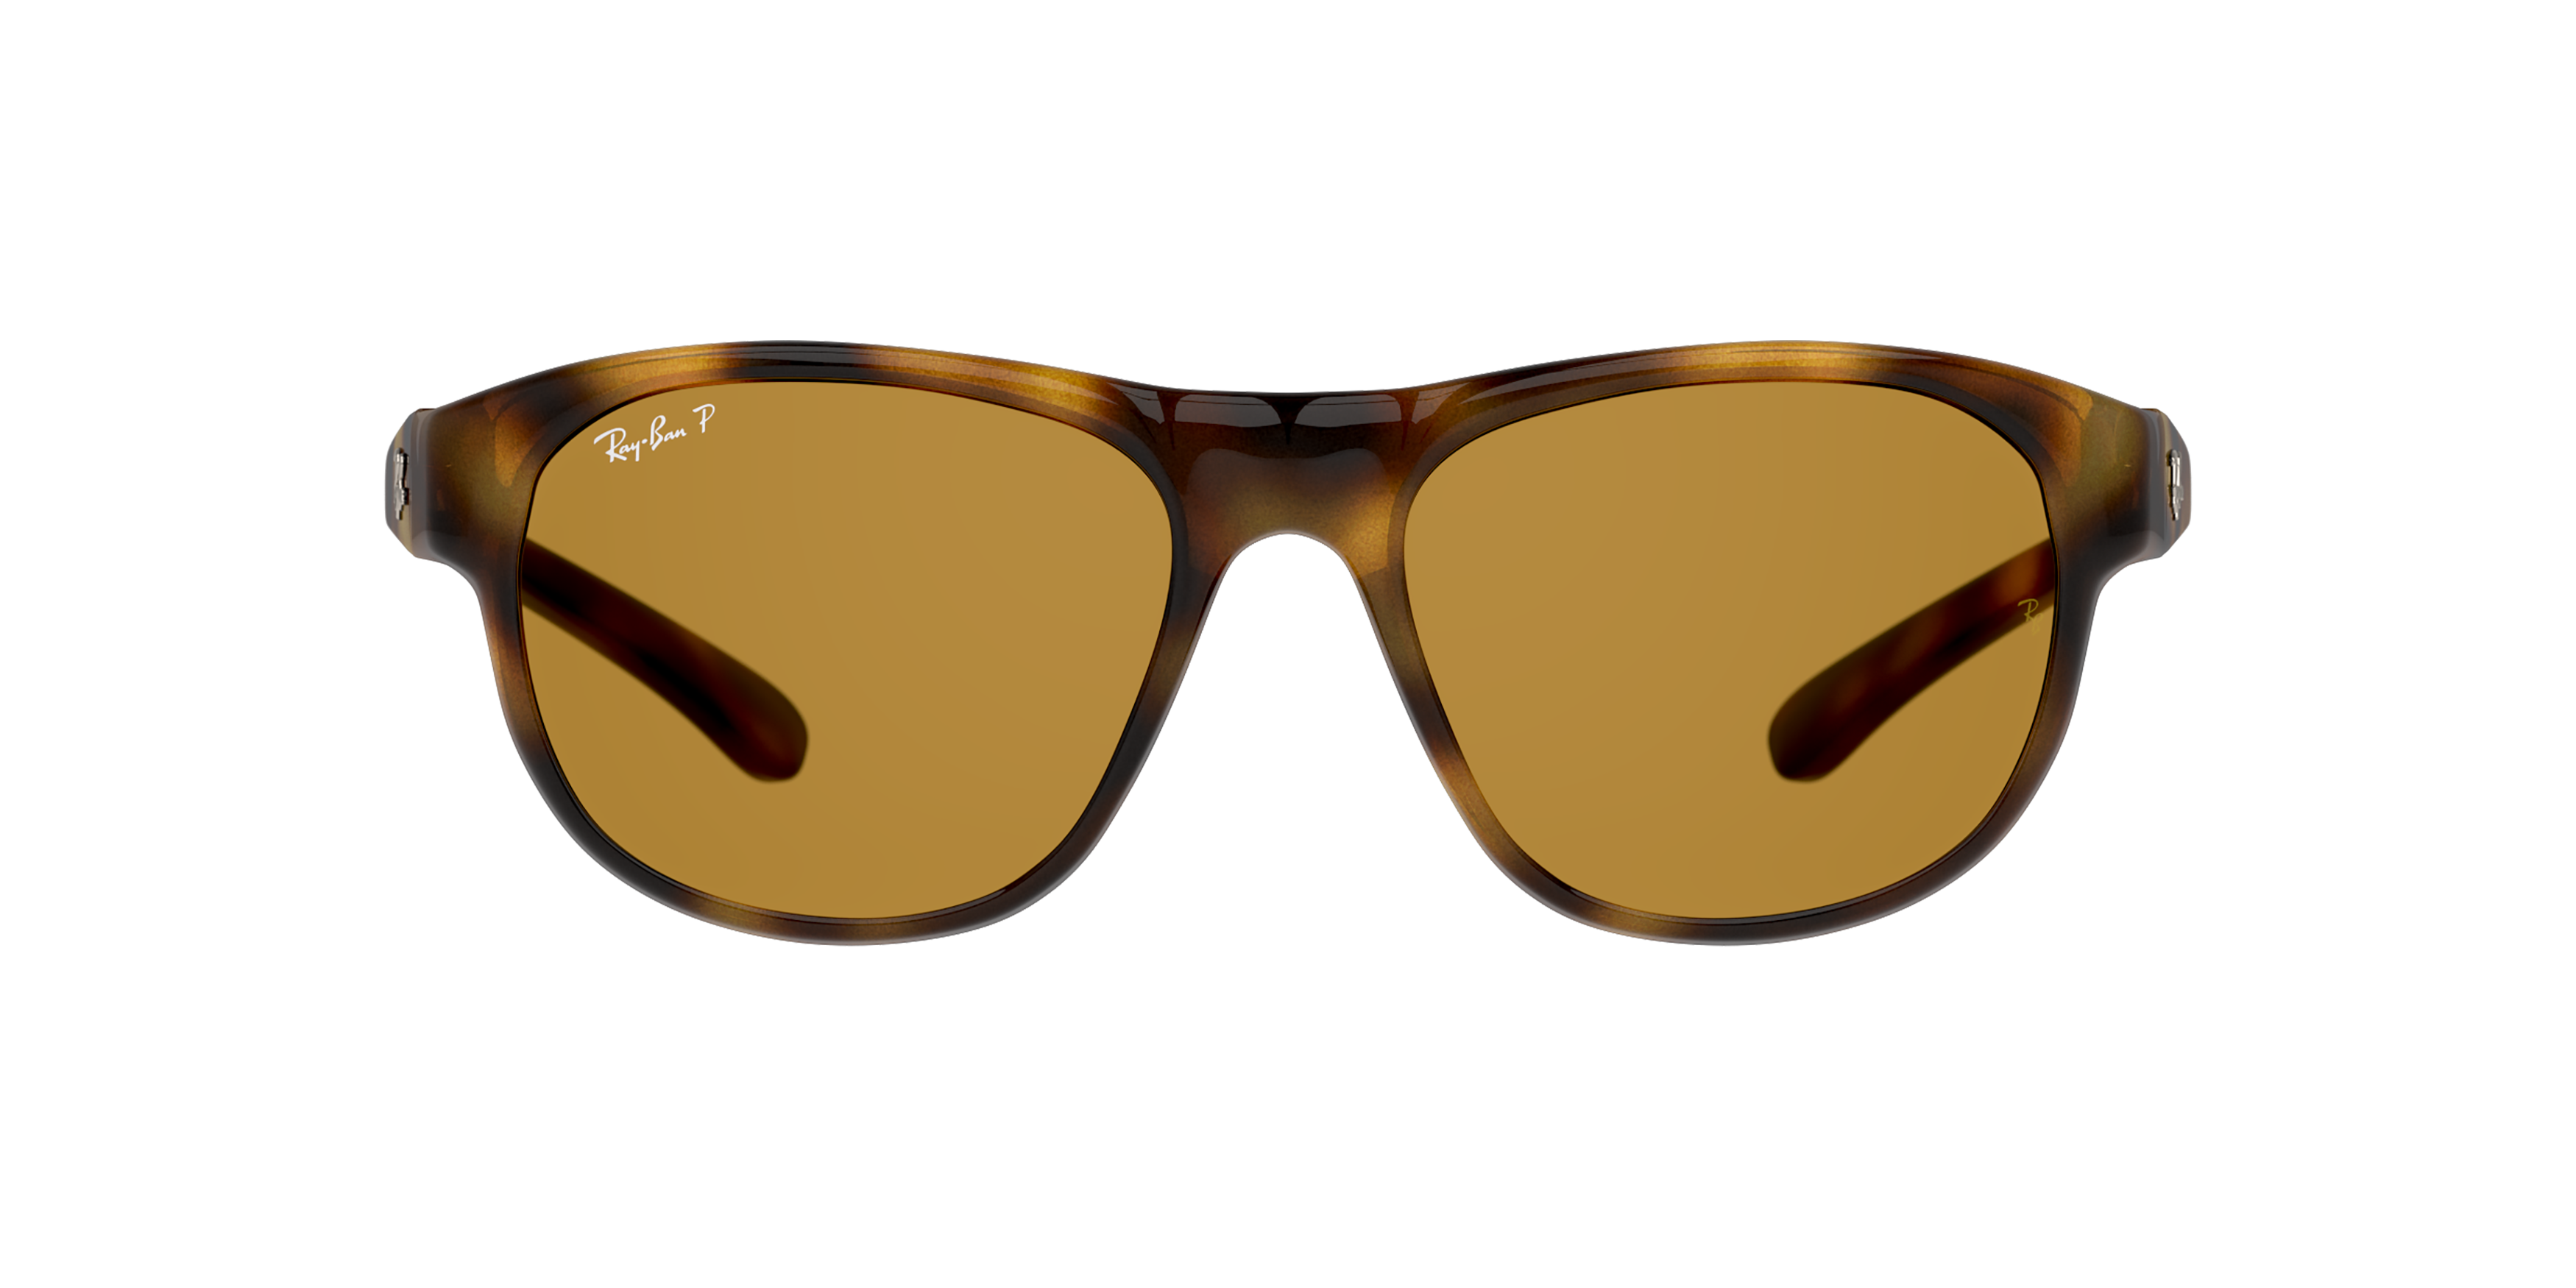 [products.image.front] RAY-BAN RB4351 710/83